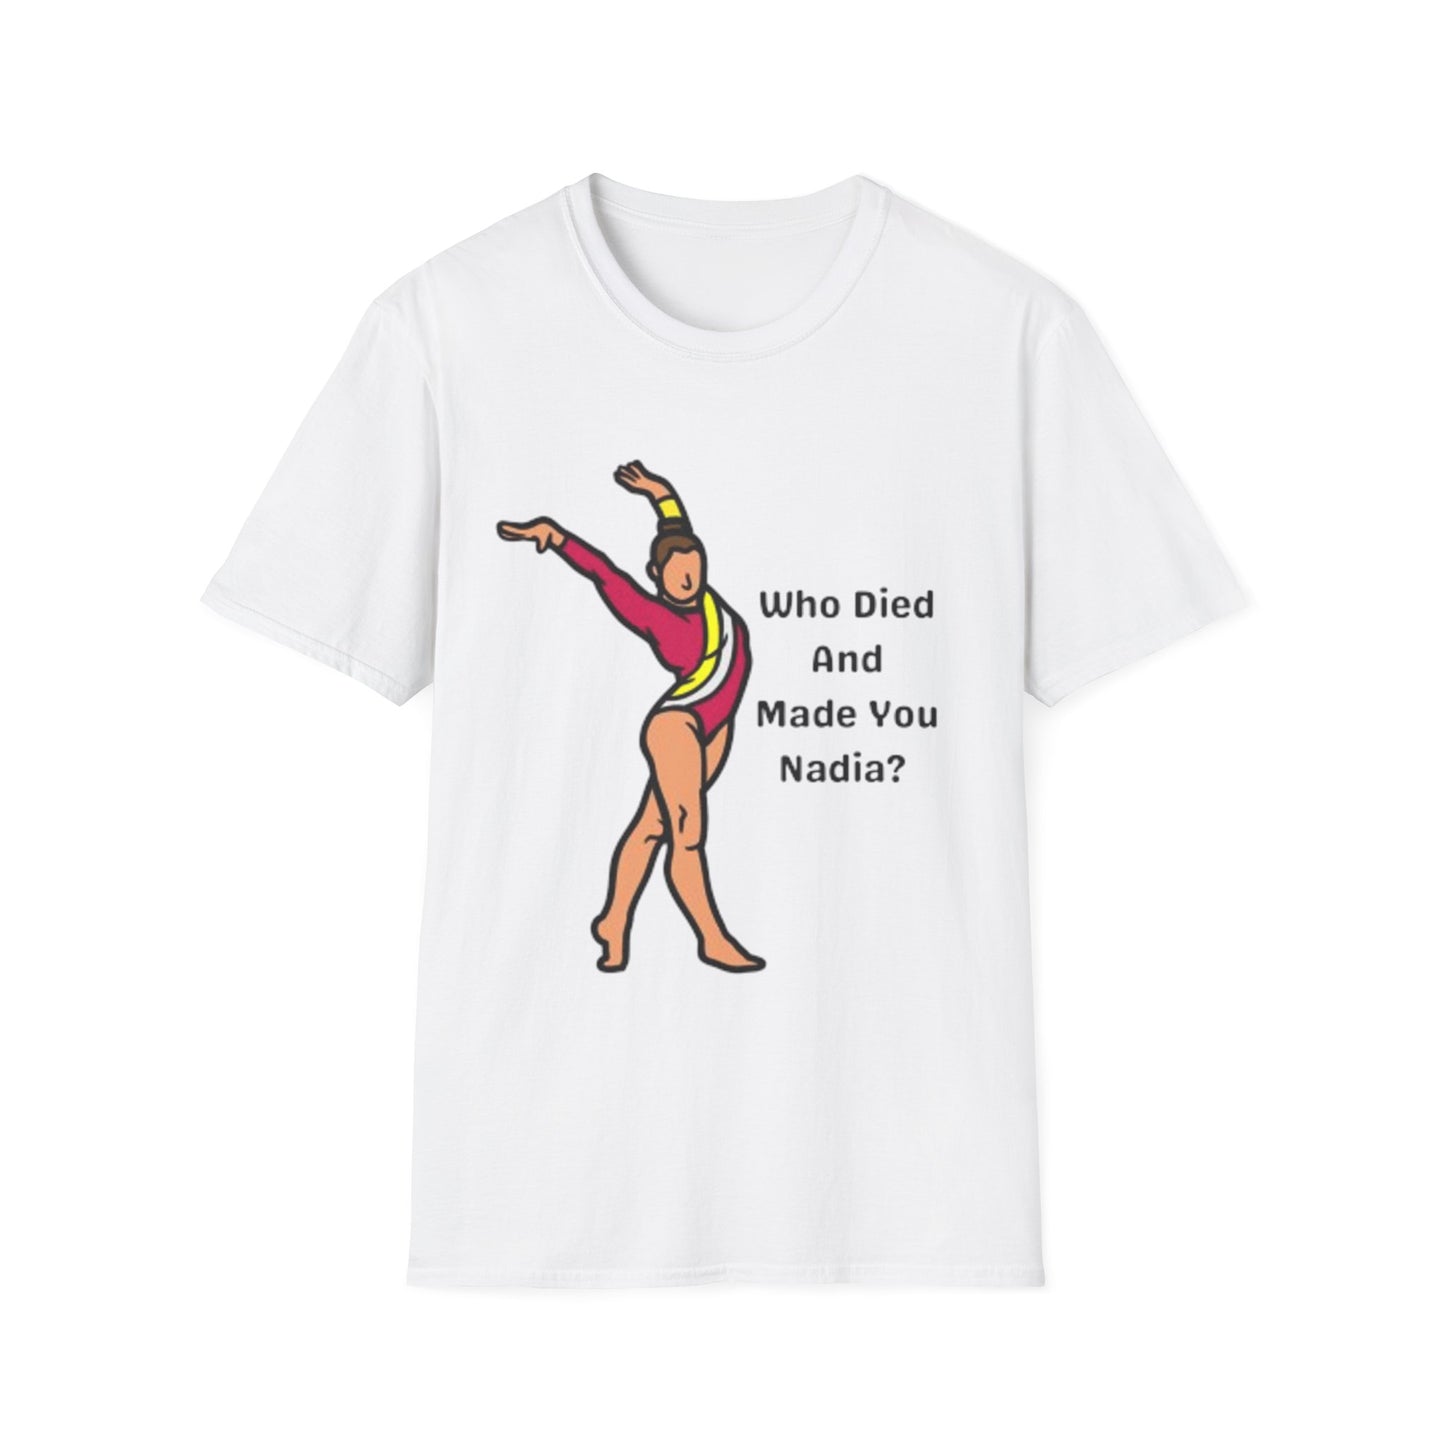 Who died and made you Nadia - Unisex Softstyle T-Shirt